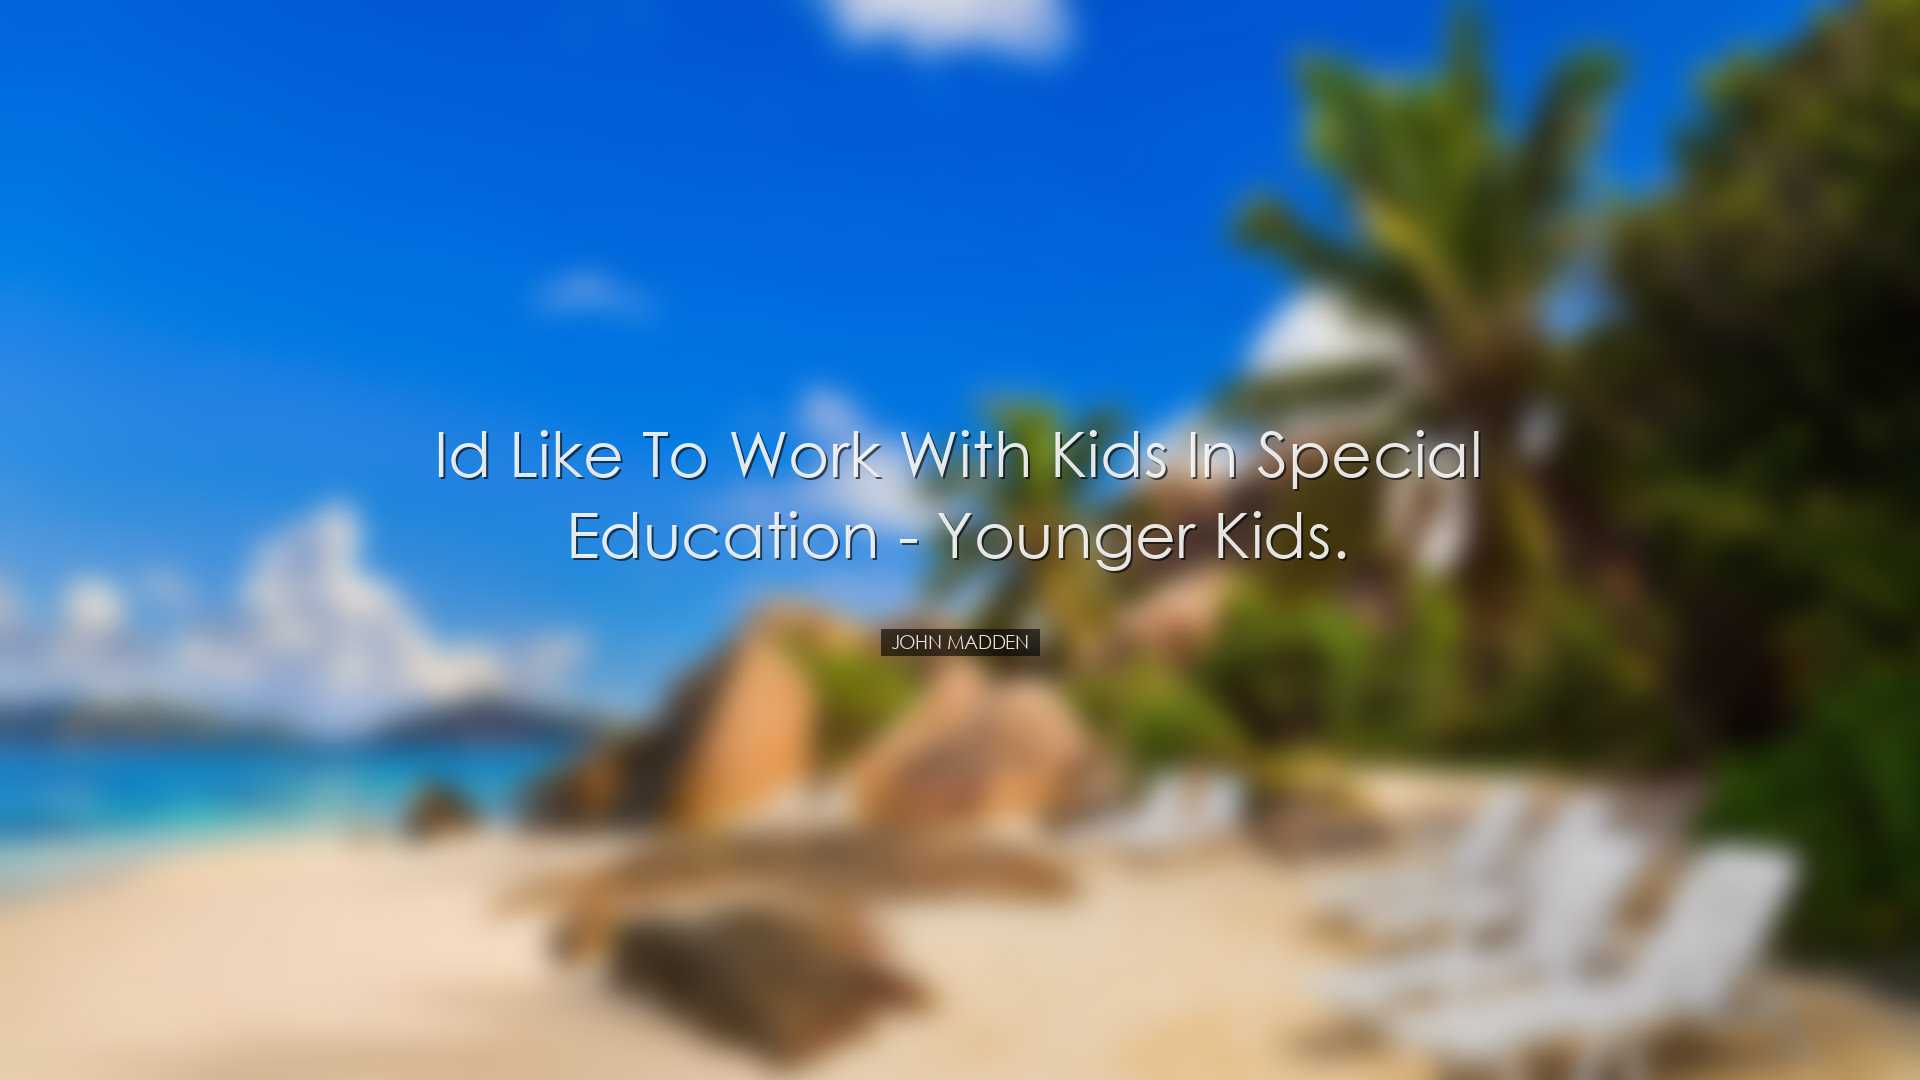 Id like to work with kids in special education - younger kids. - J